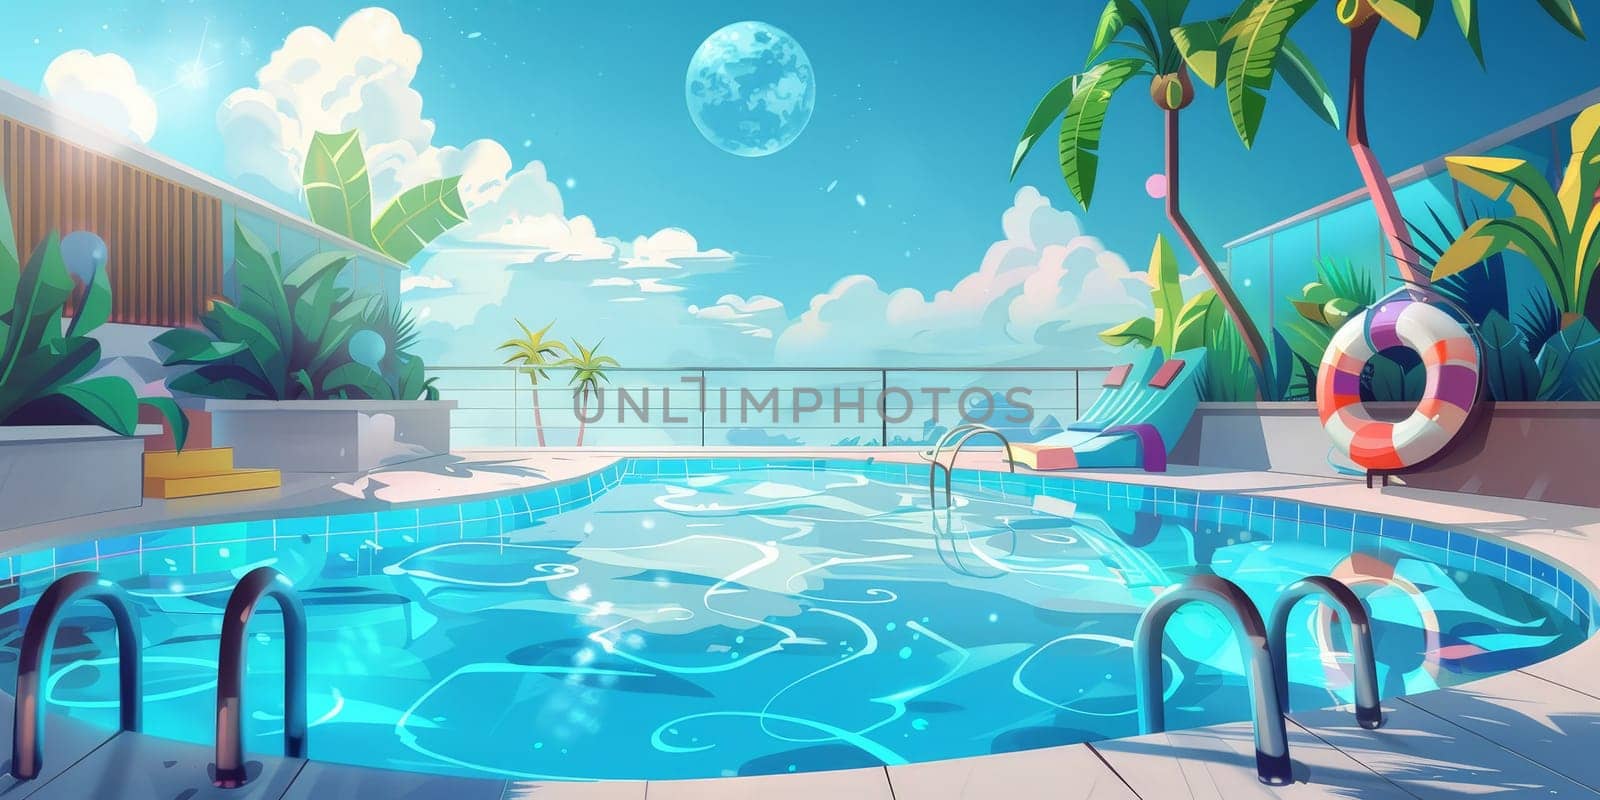 A computer generated image of a pool with a moon in the sky by nateemee